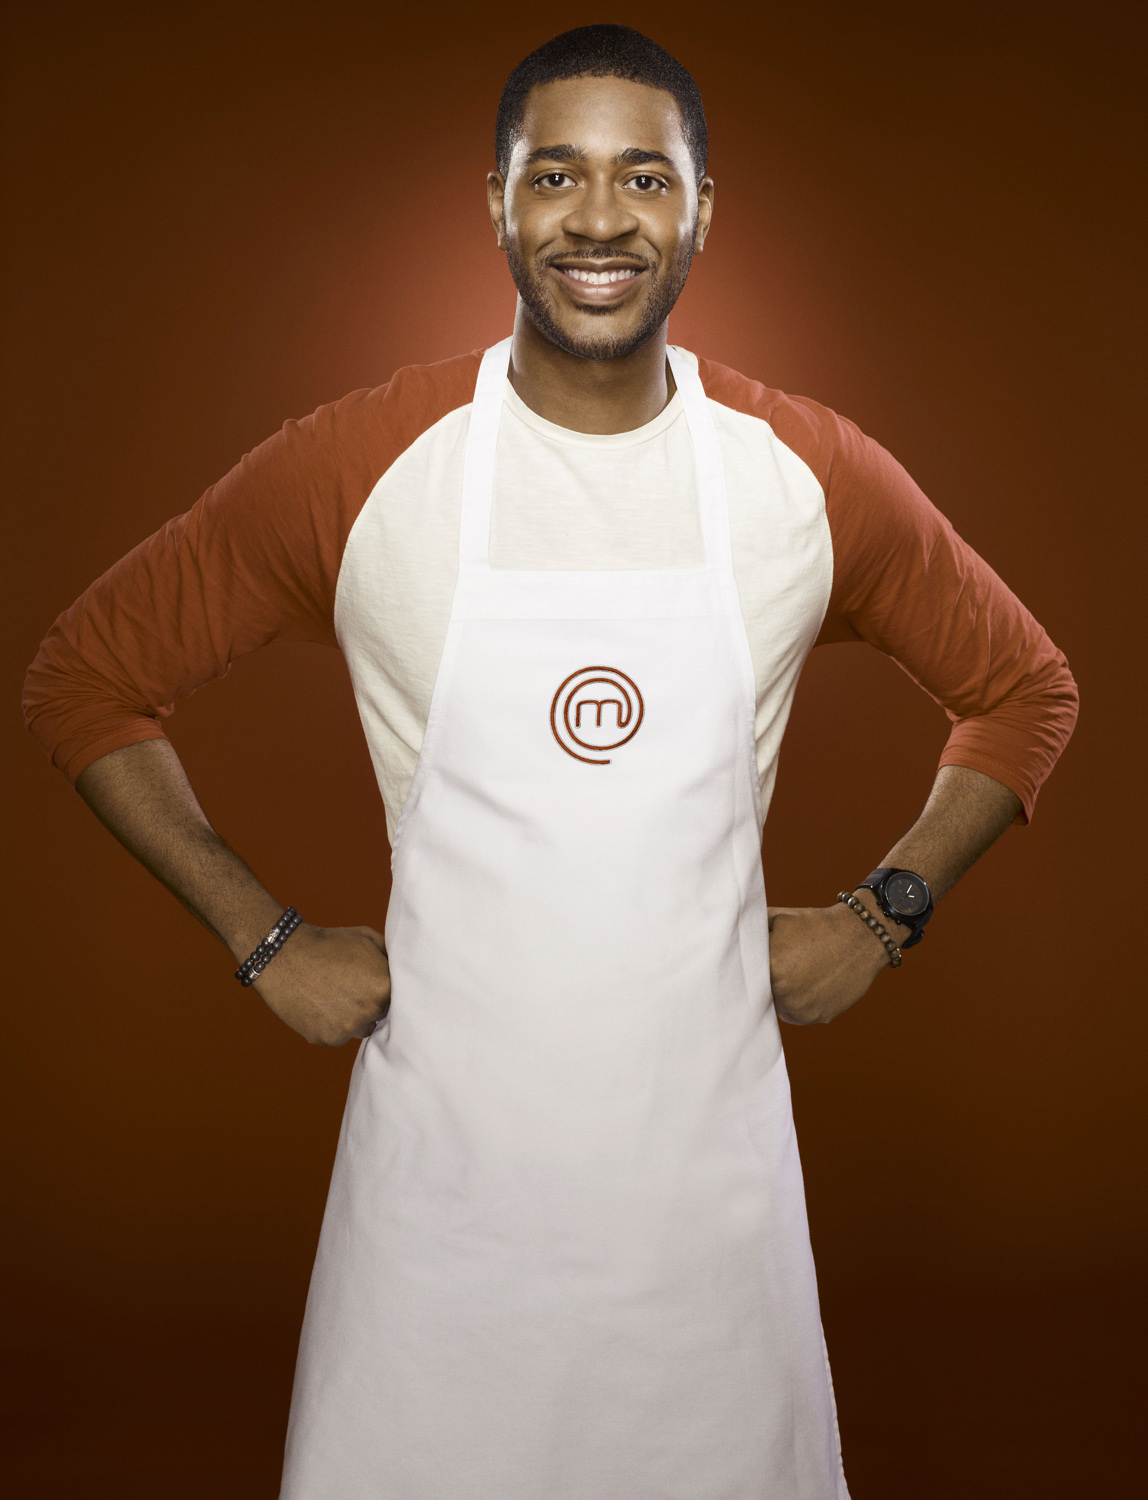 Masterchef Runner Up Joshua Marks Commits Suicide At 26